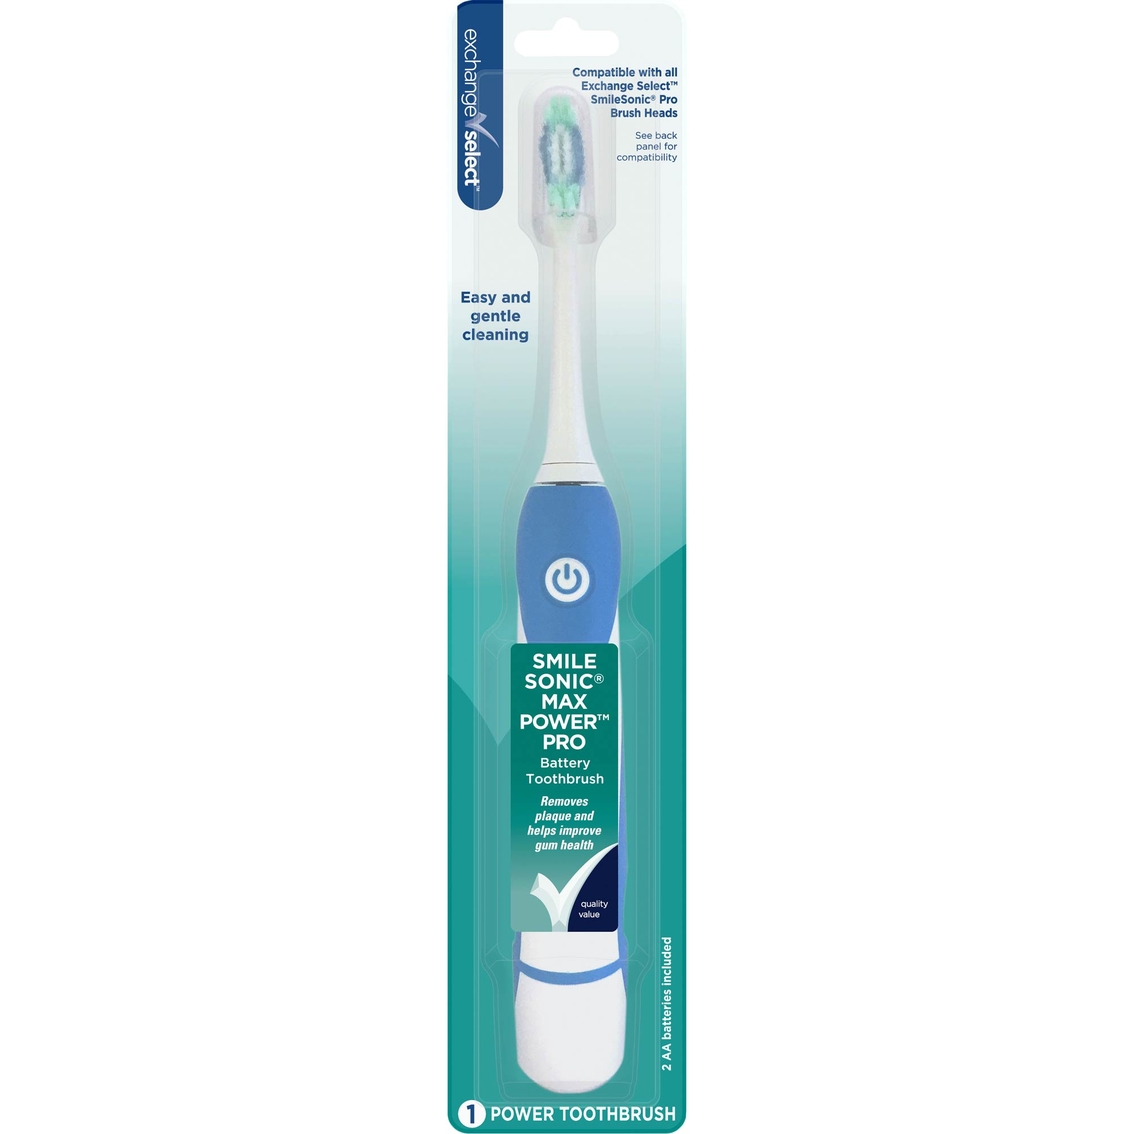 Exchange Select Smile Sonic Max Power Pro Battery Toothbrush | Tooth Brushes  | Beauty & Health | Shop The Exchange